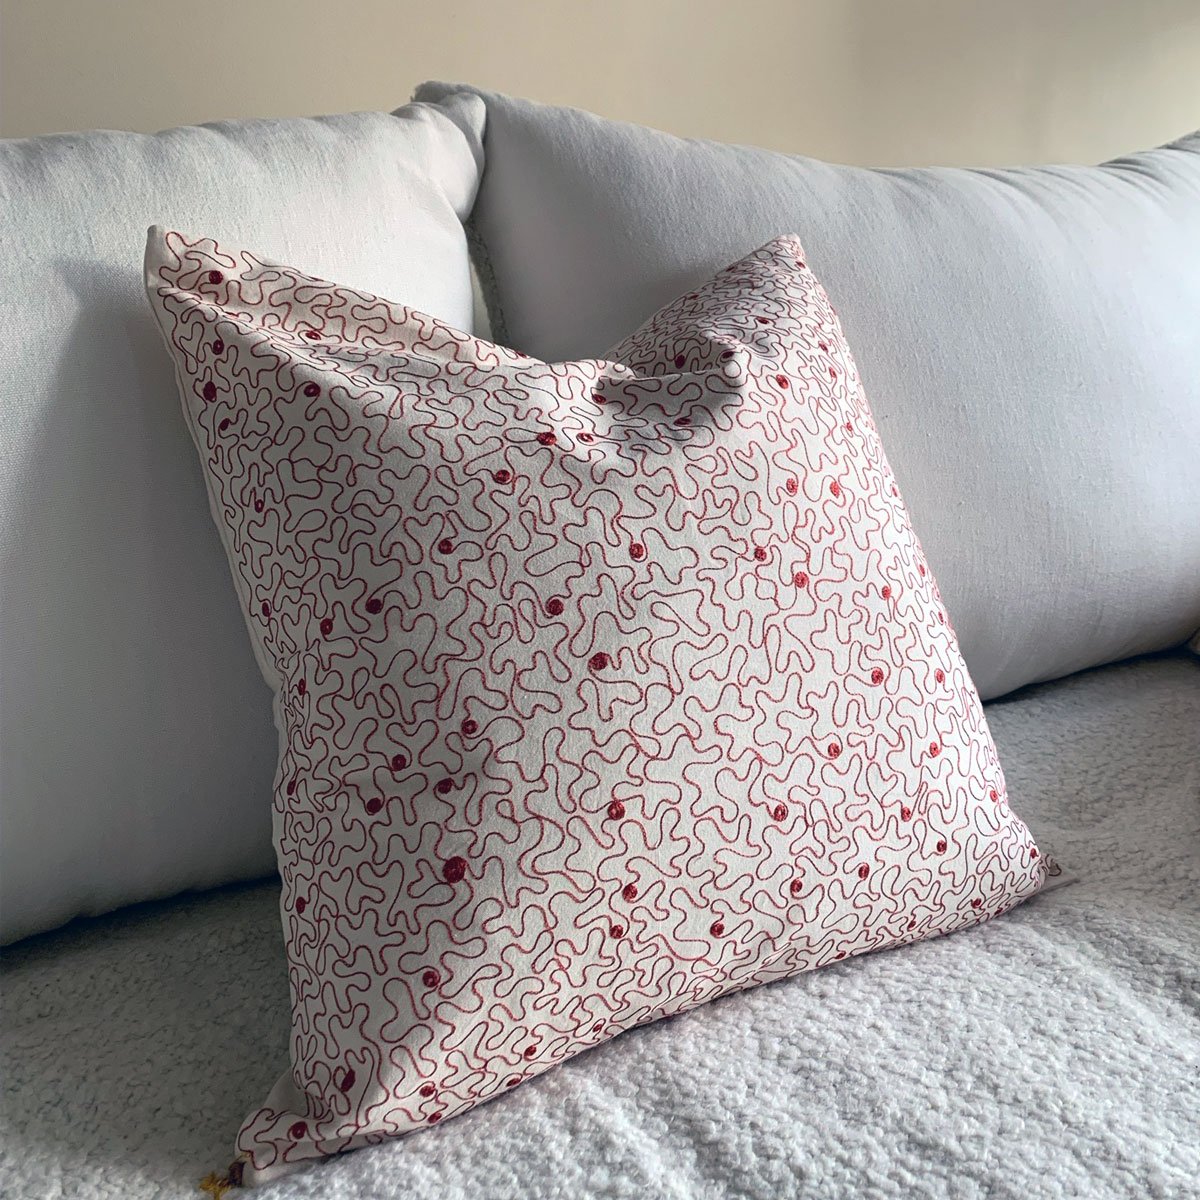 Embroidered pillowcase 